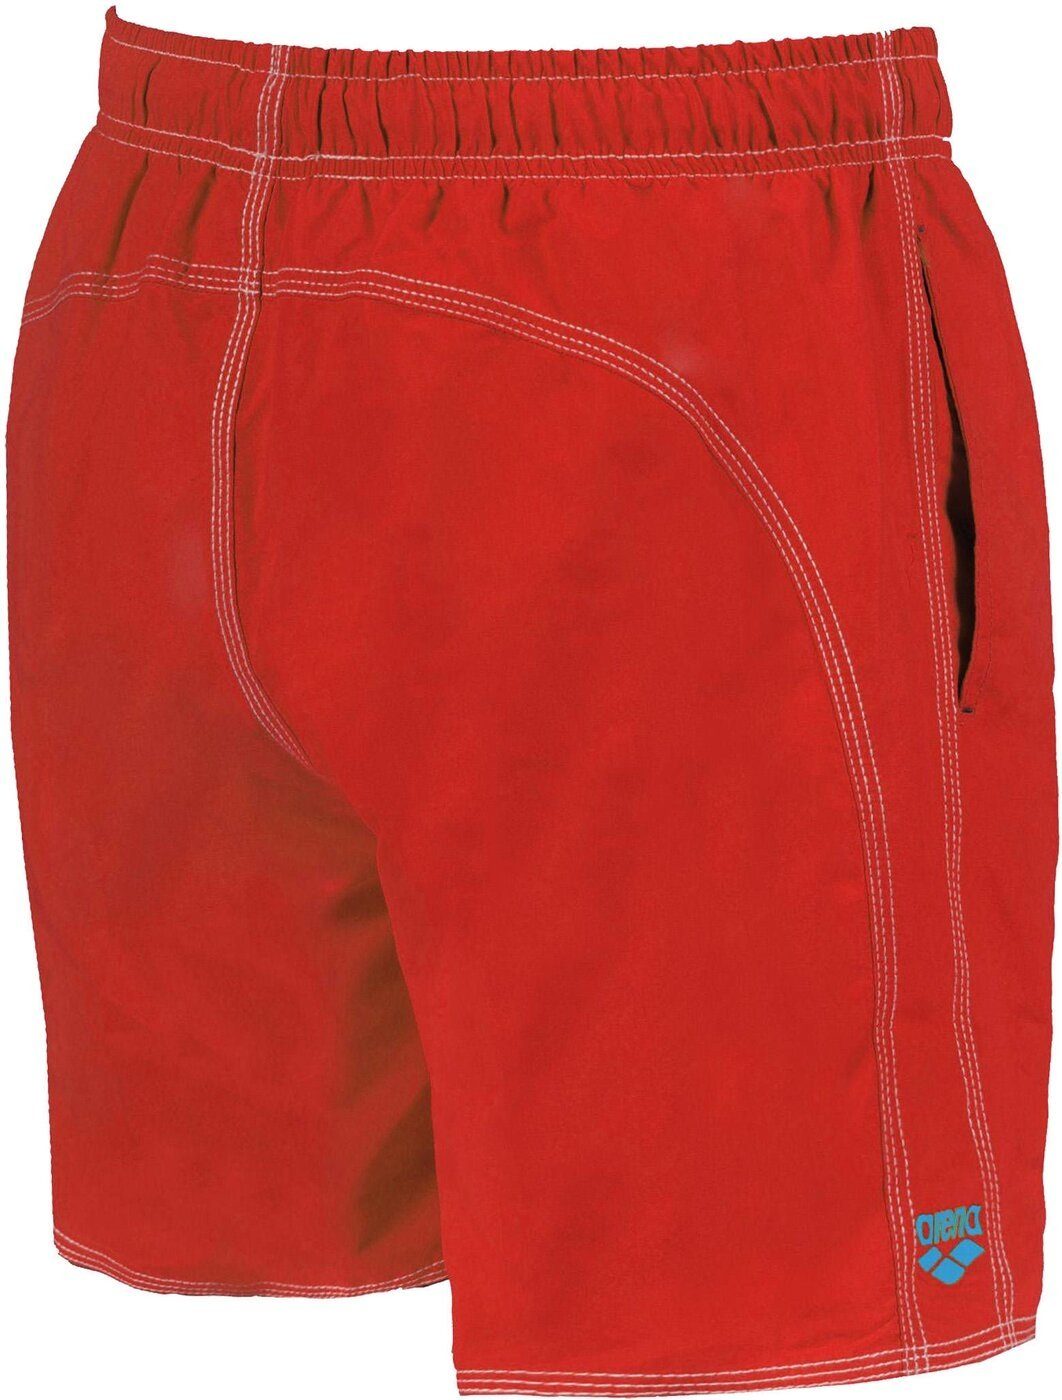 SOLID 48 RED-TURQUOISE FUNDAMENTALS Arena Badeshorts BOXER